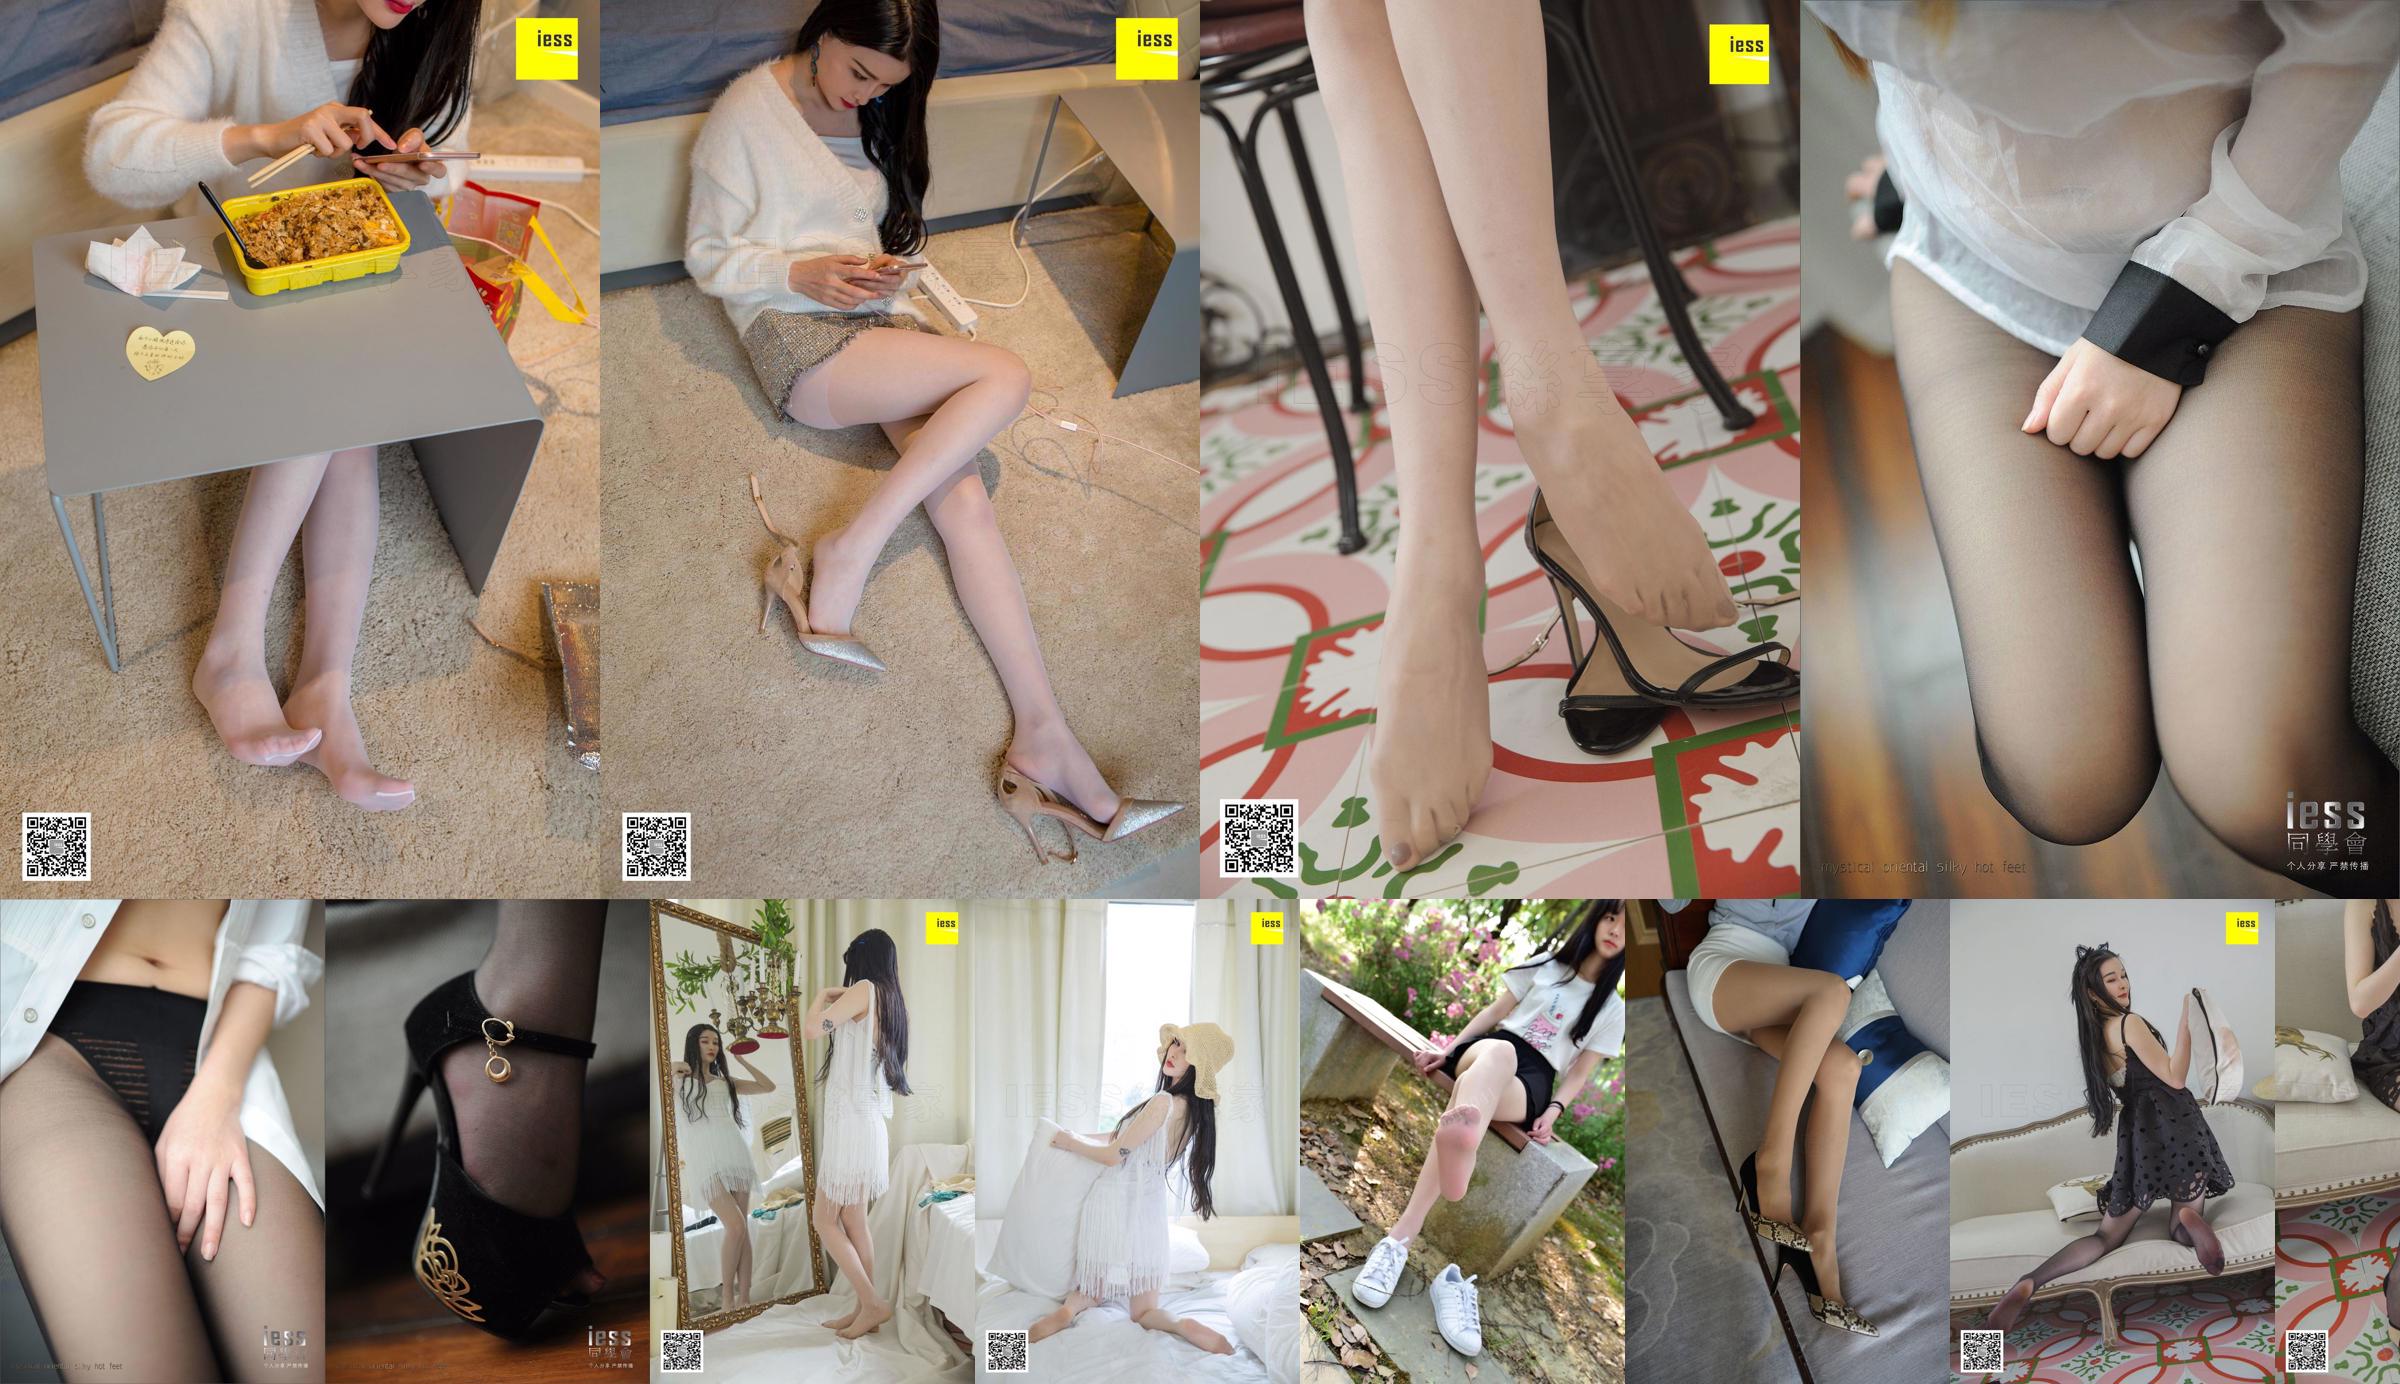 Model Mengmeng "Mengmeng Eating Takeaway" Silky Feet and Beautiful Legs [Iss] No.e2cf7a Page 1